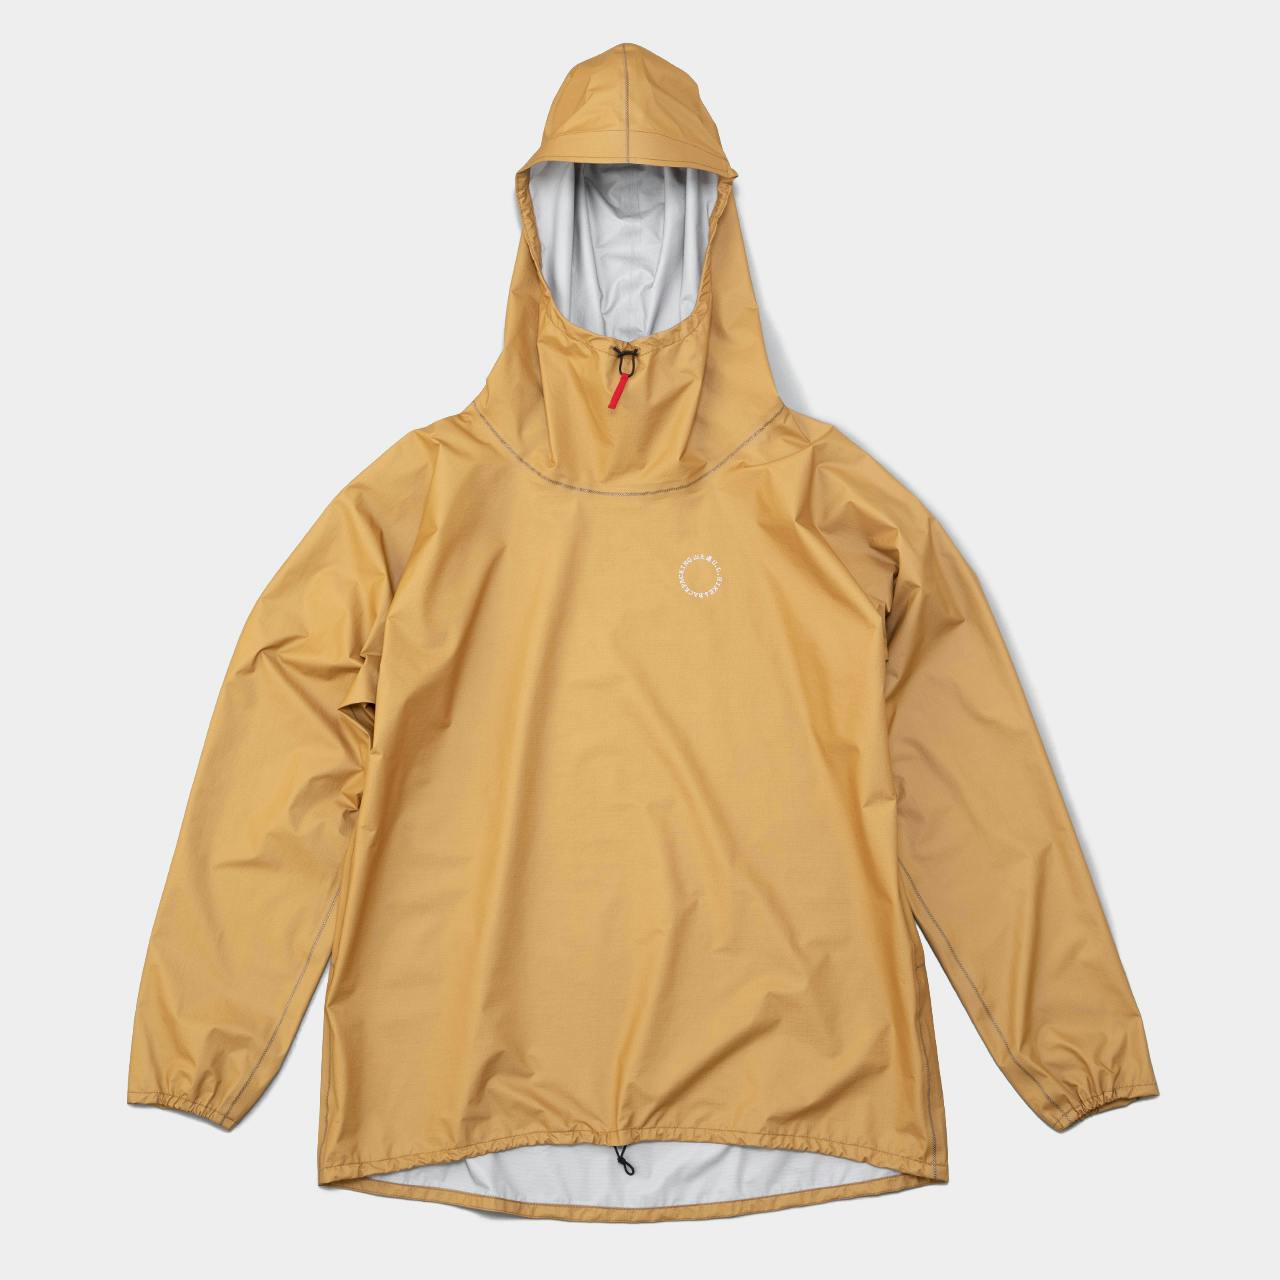 UL All-weather Hoody<br>For Sale Apr 24, 18:00 JST<br>Restocked on Online Shop<br>Zipperless All-Weather Active Wear